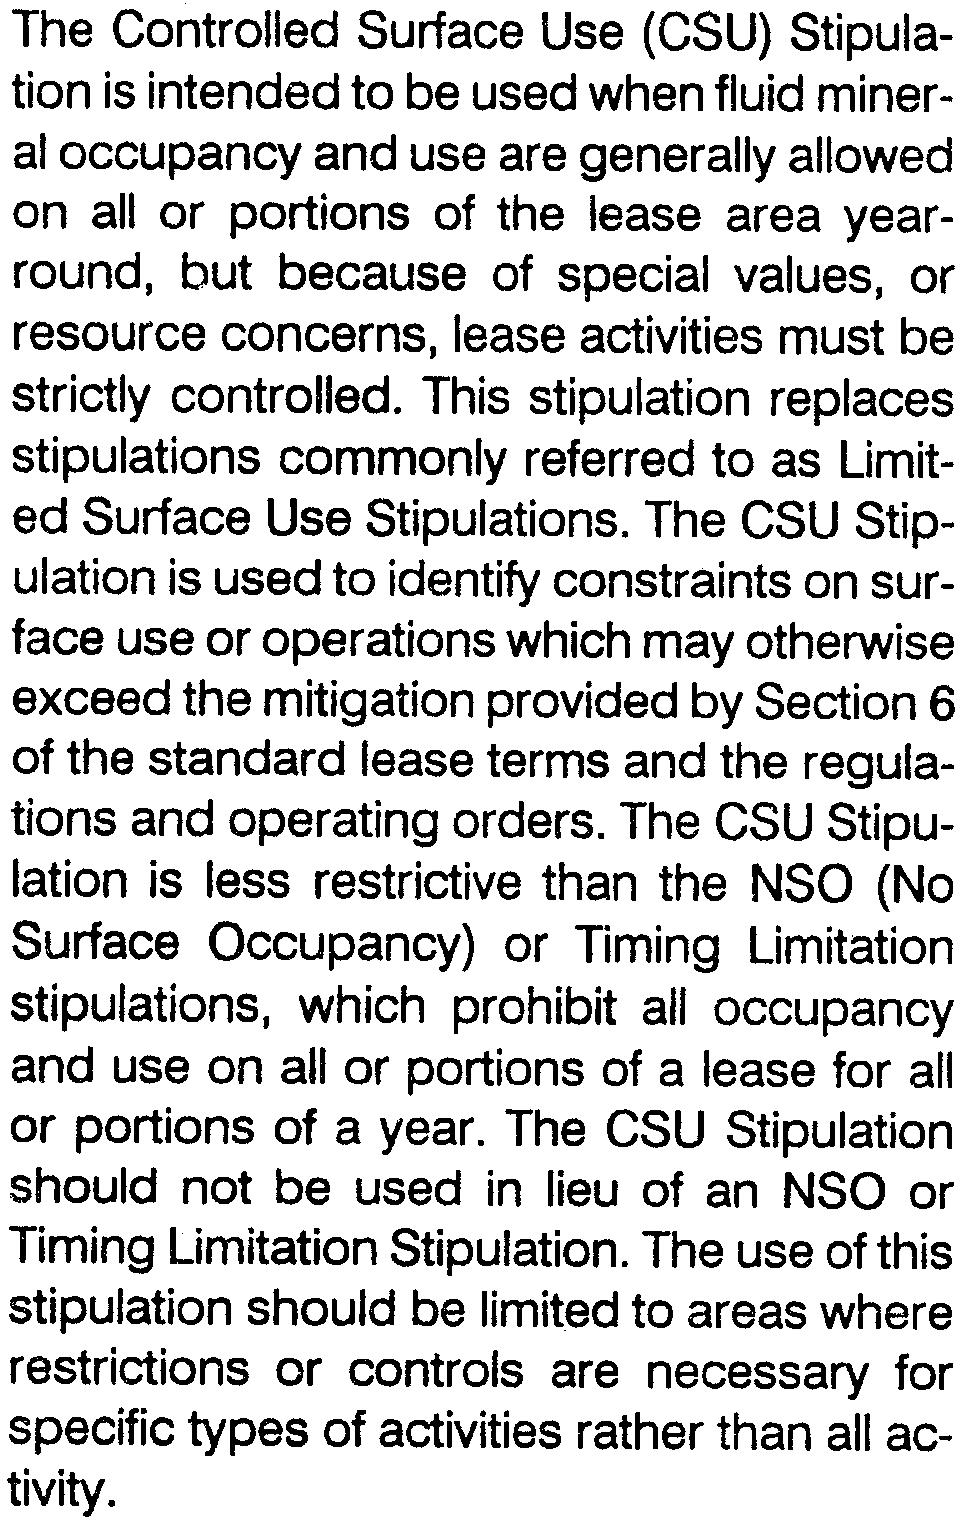 CONTROLLED SURFACE USE STIPULATION GUIDANCE The Controlled Surface Use (CSU) Stipulation is intended to be used when fluid miner - al occupancy and use are generally allowed on all or portions of the